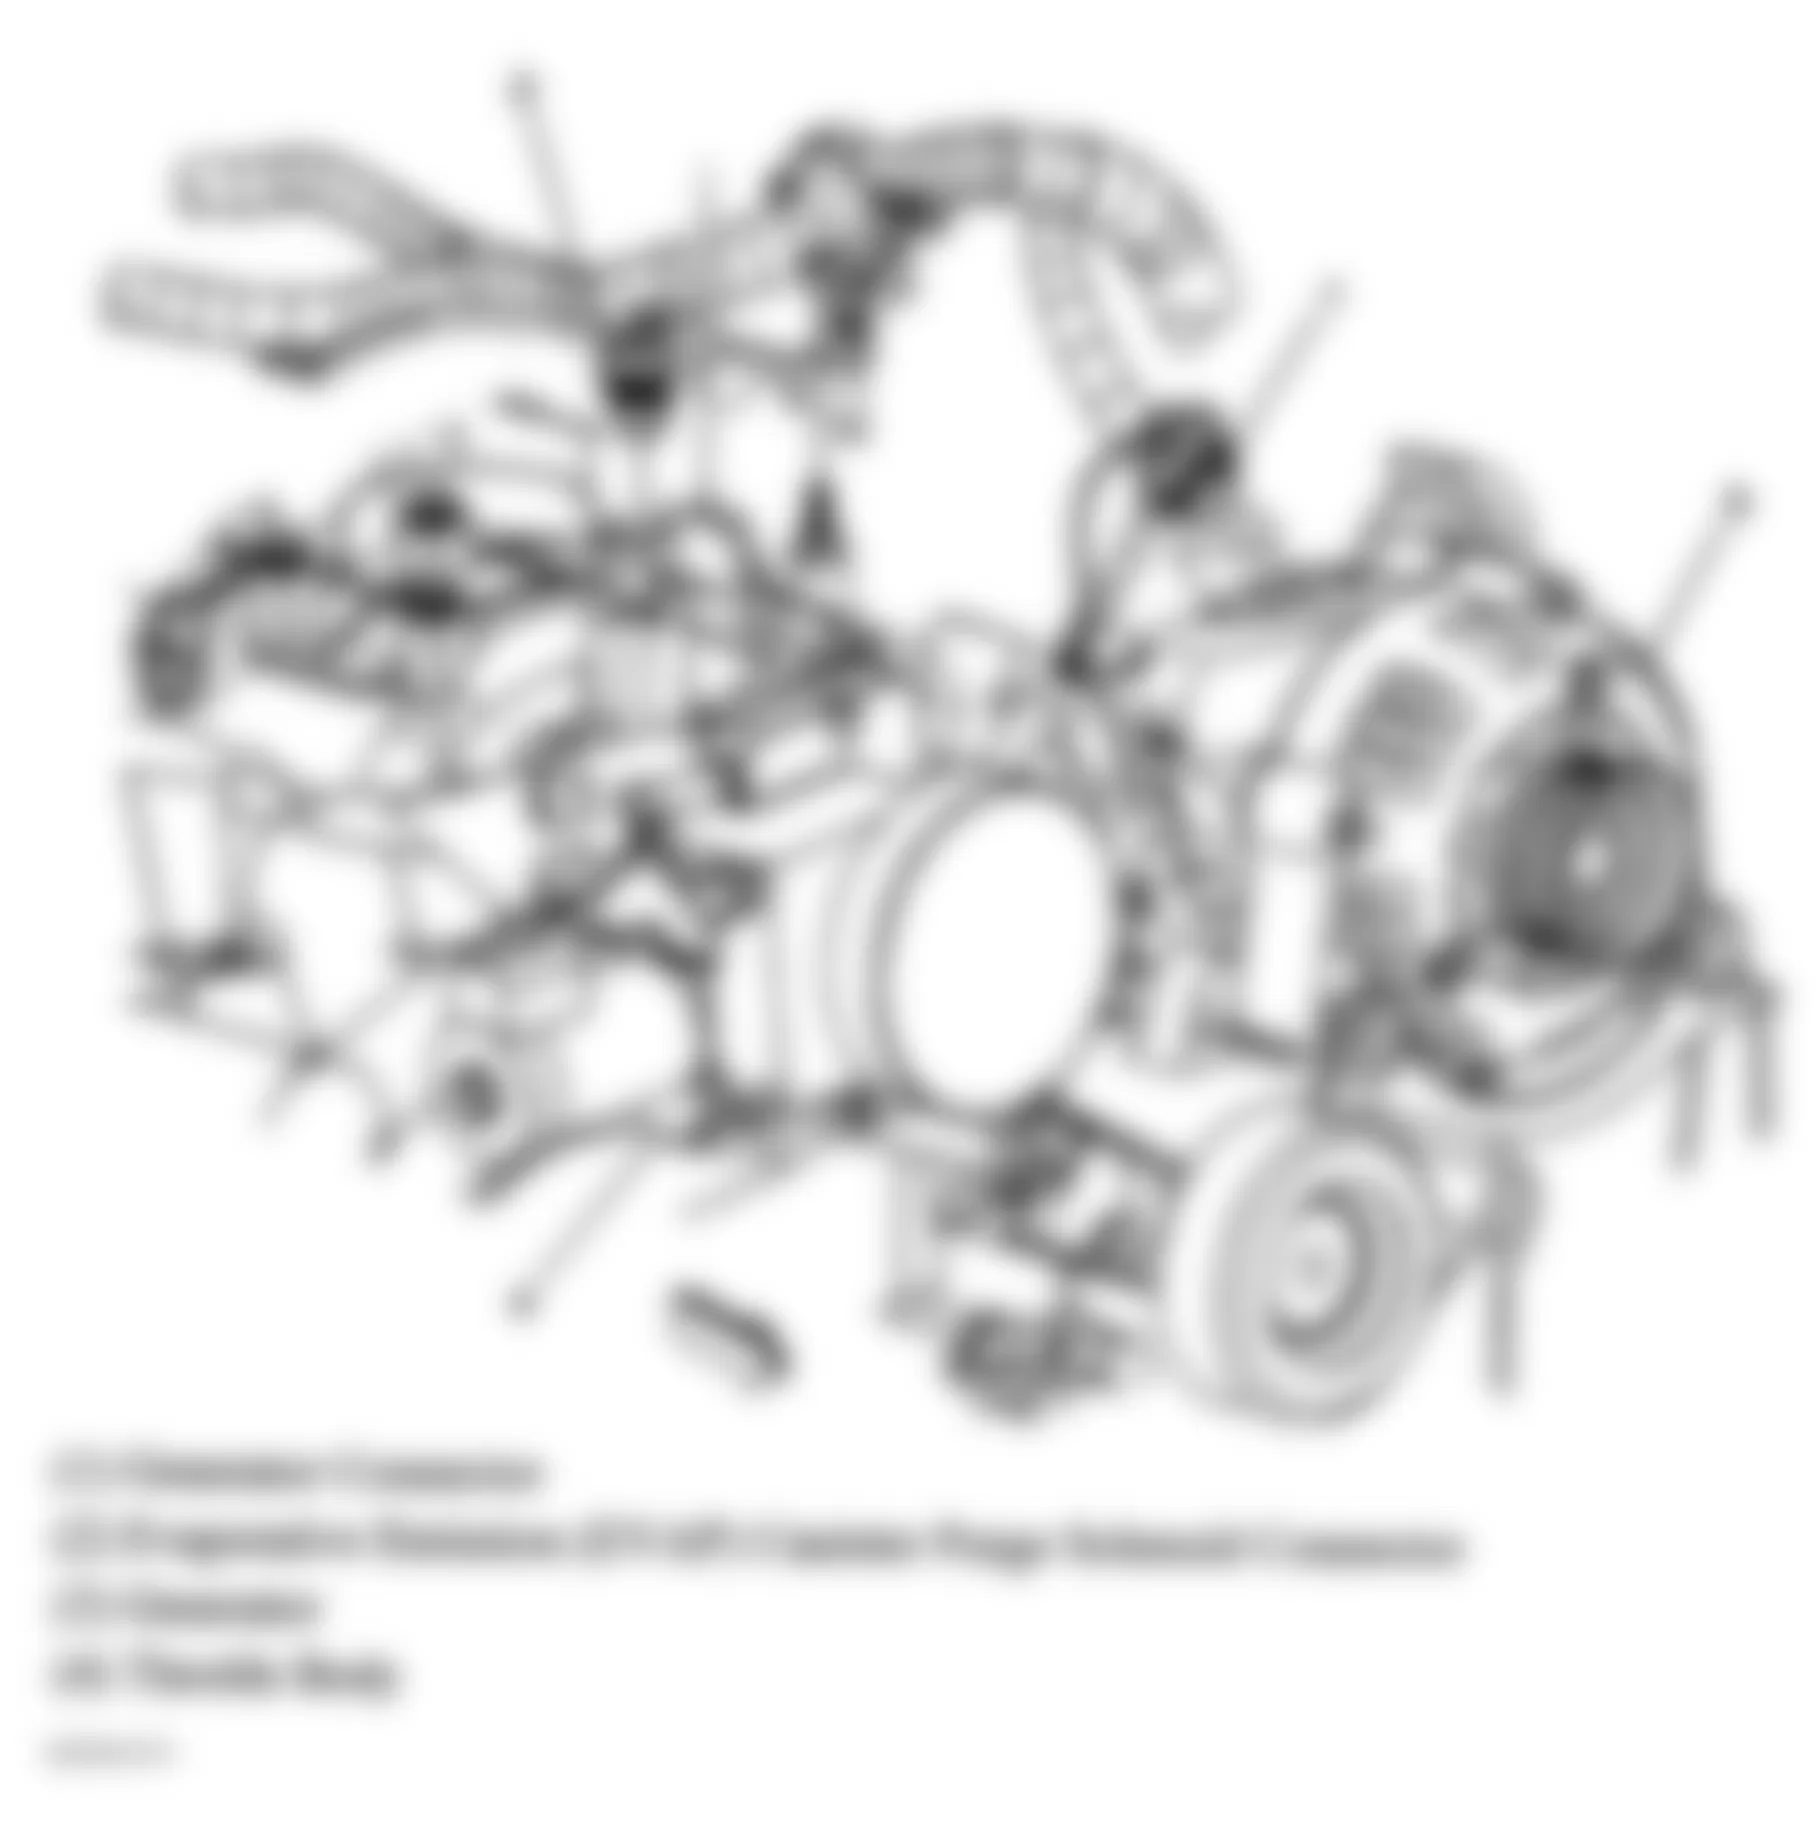 GMC Envoy XUV 2004 - Component Locations -  Top Front Of Engine (5.3L)